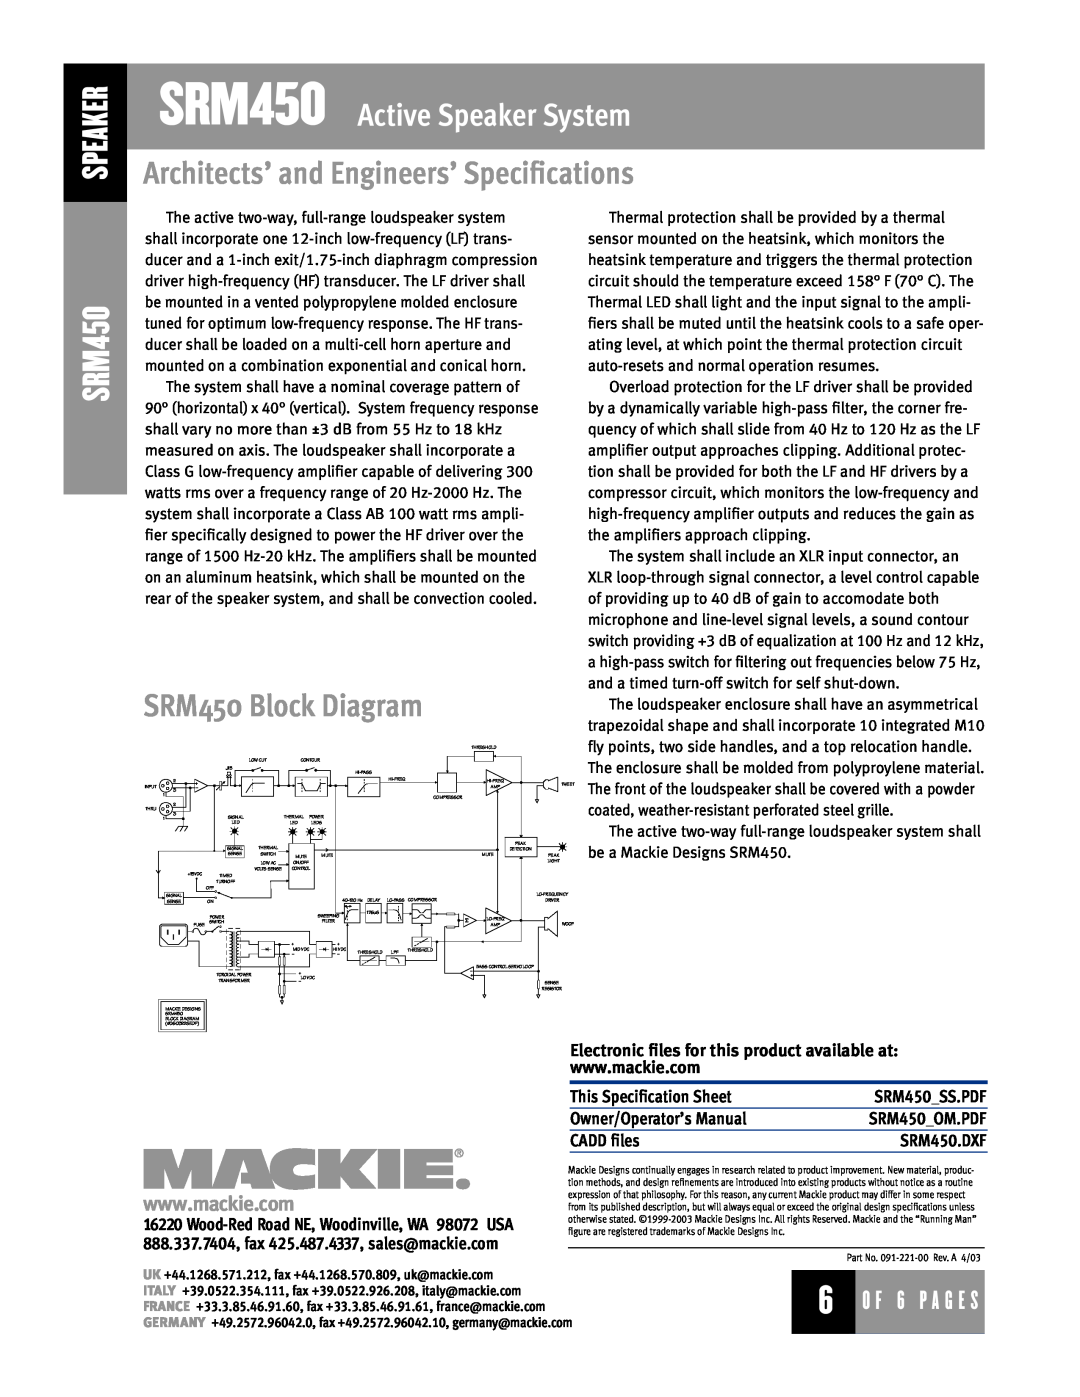 Mackie manual Architects’ and Engineers’ Specifications, SRM450 Block Diagram, SRM450 Active Speaker System 